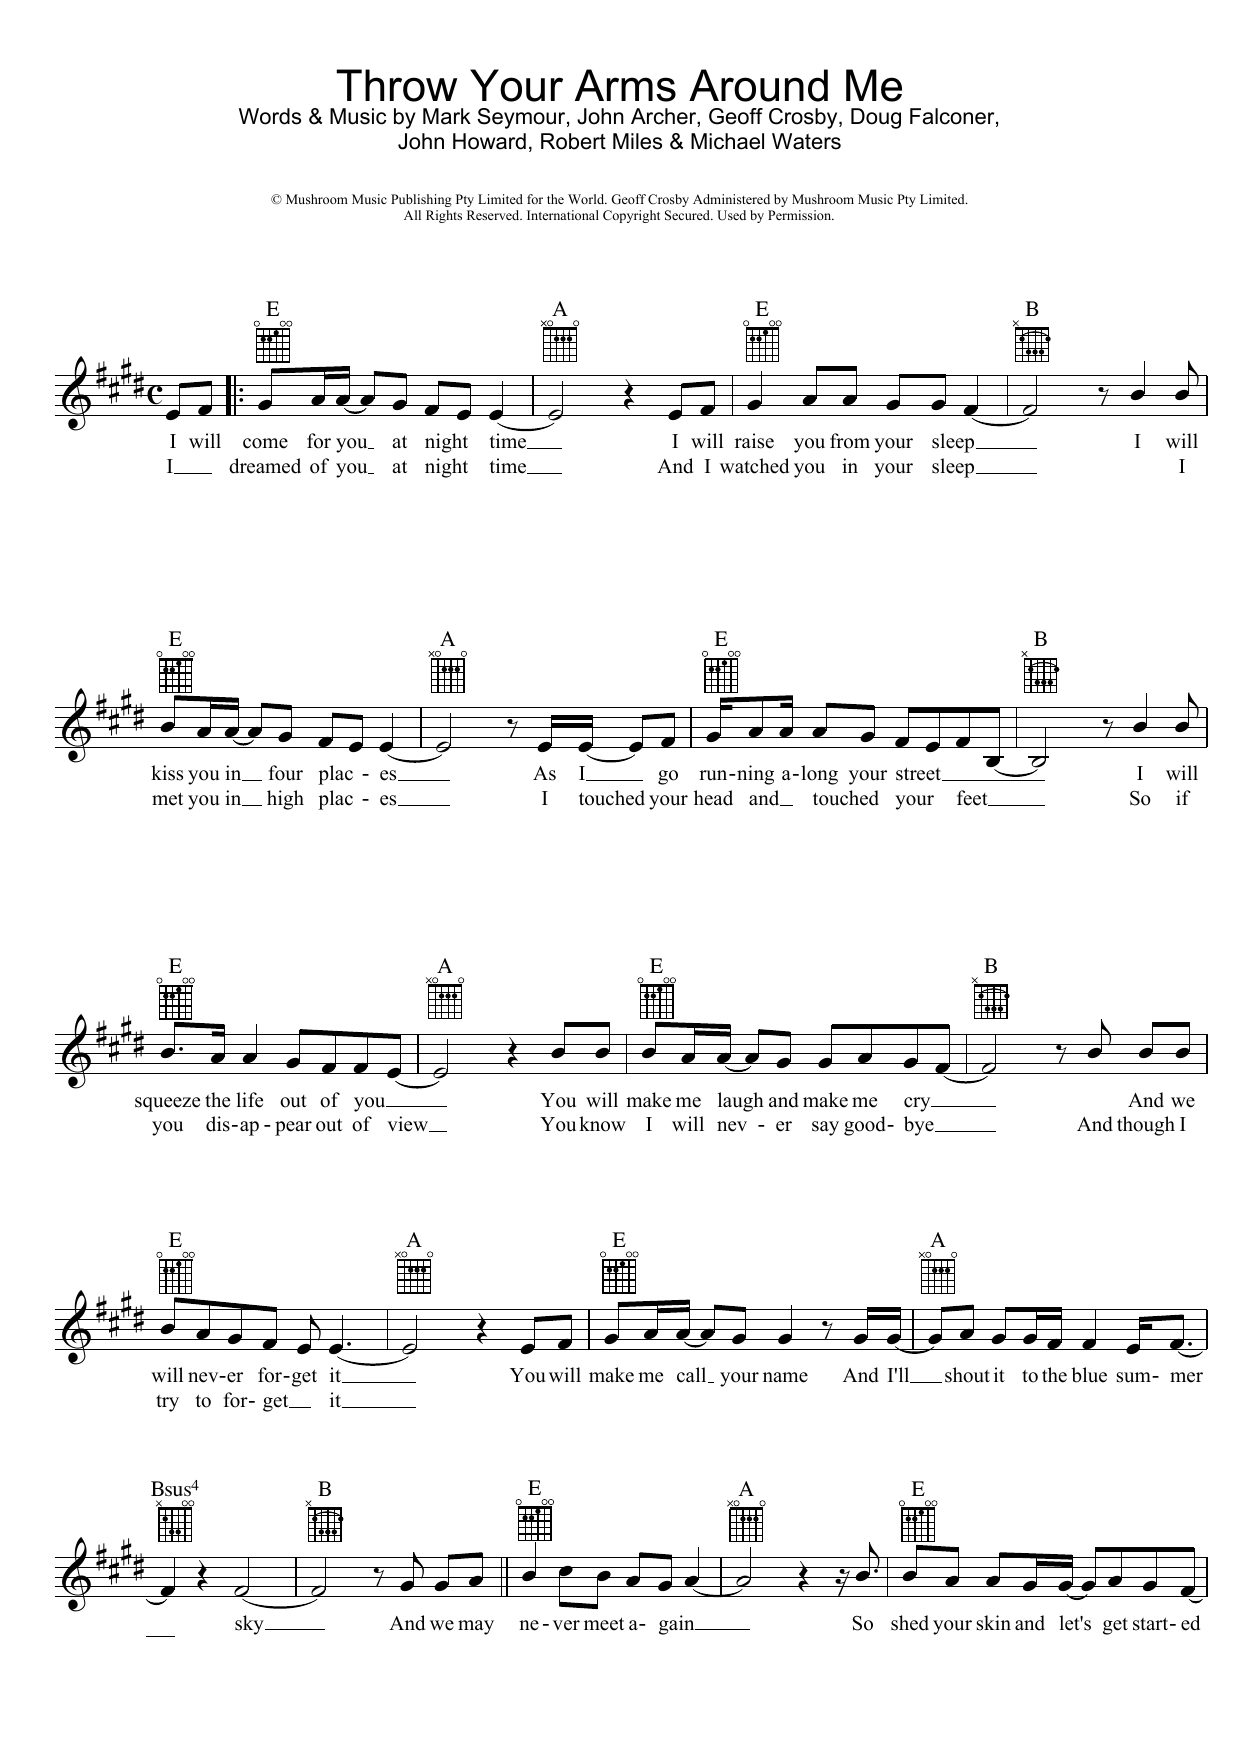 Download Hunters & Collectors Throw Your Arms Around Me Sheet Music